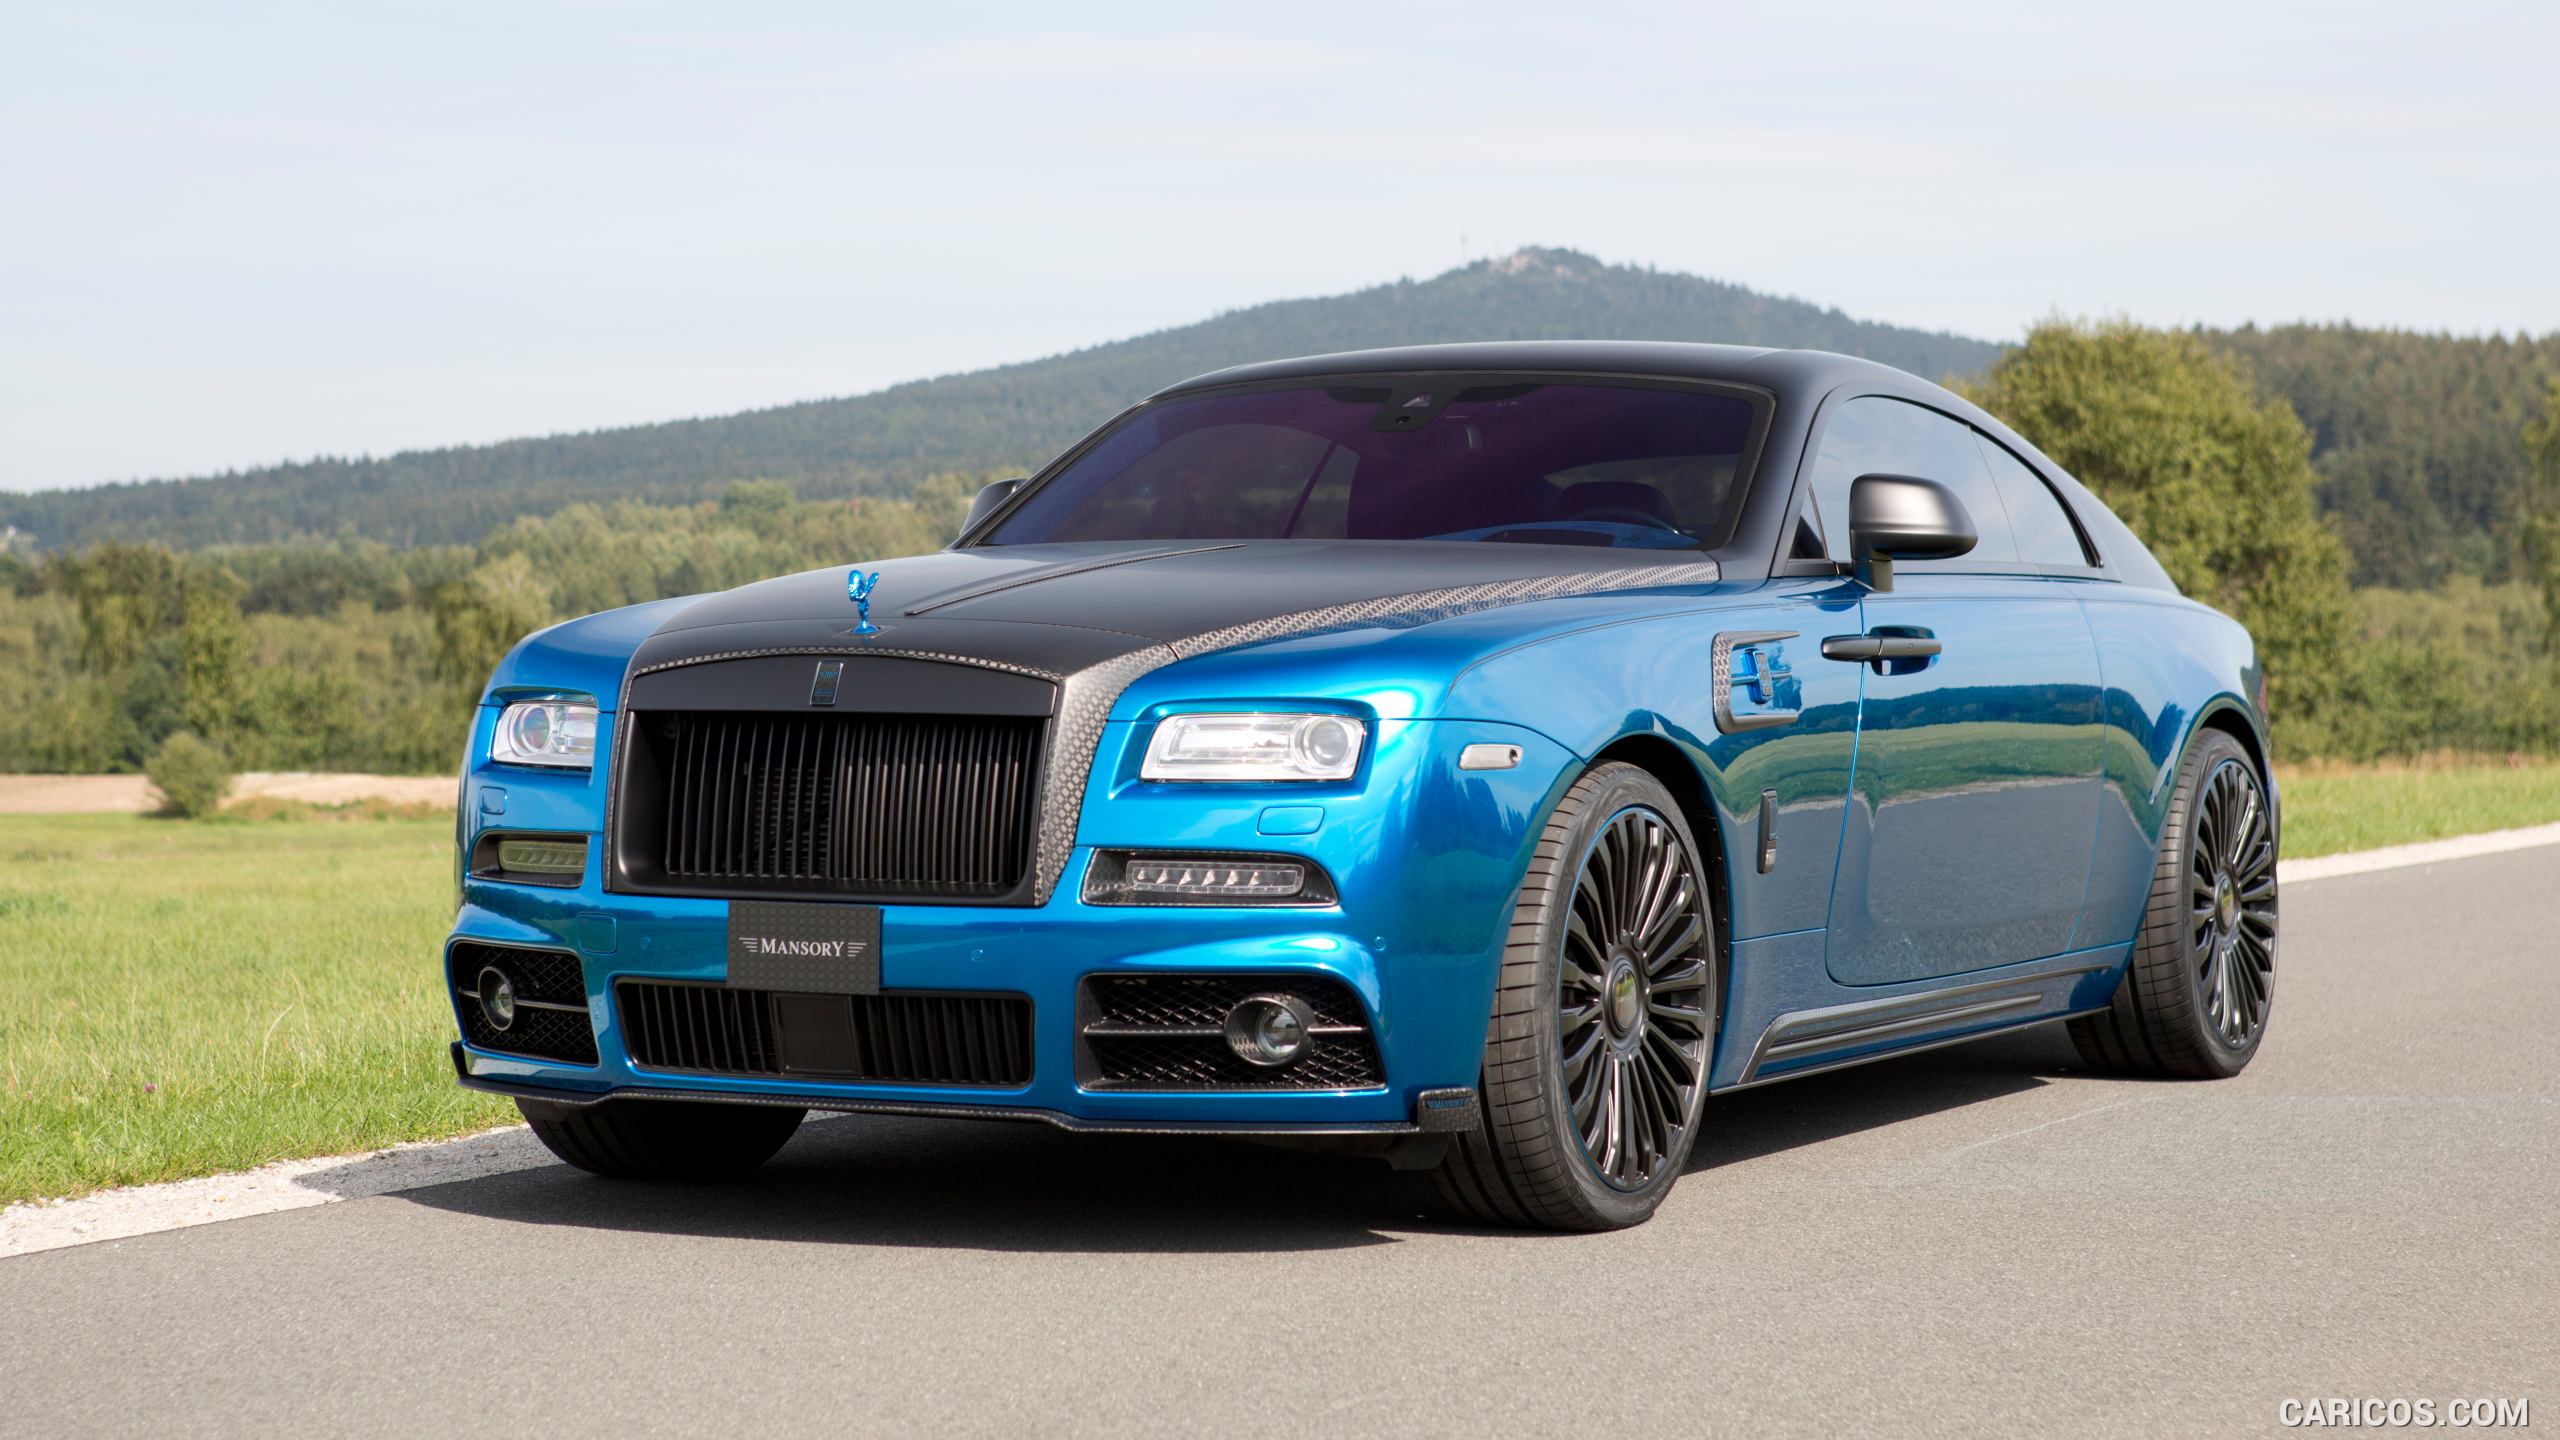 2015 MANSORY BLEURION based on Rolls-Royce Wraith - Front | Caricos